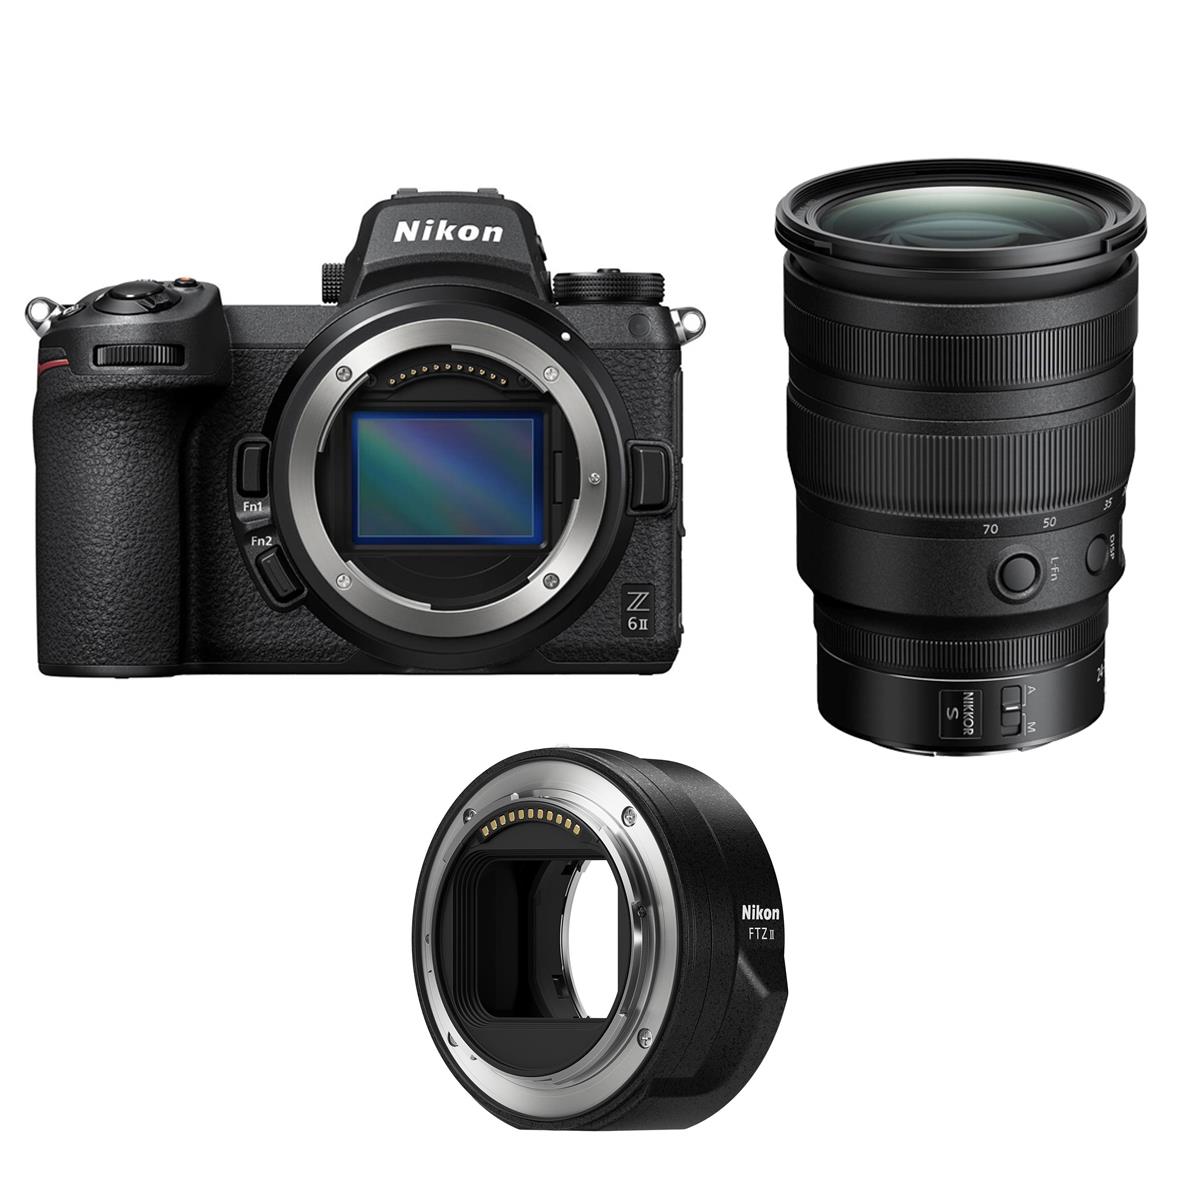 Image of Nikon Z 6II Mirrorless Camera with 24-70mm f/2.8 S Lens and FTZ II Adapter